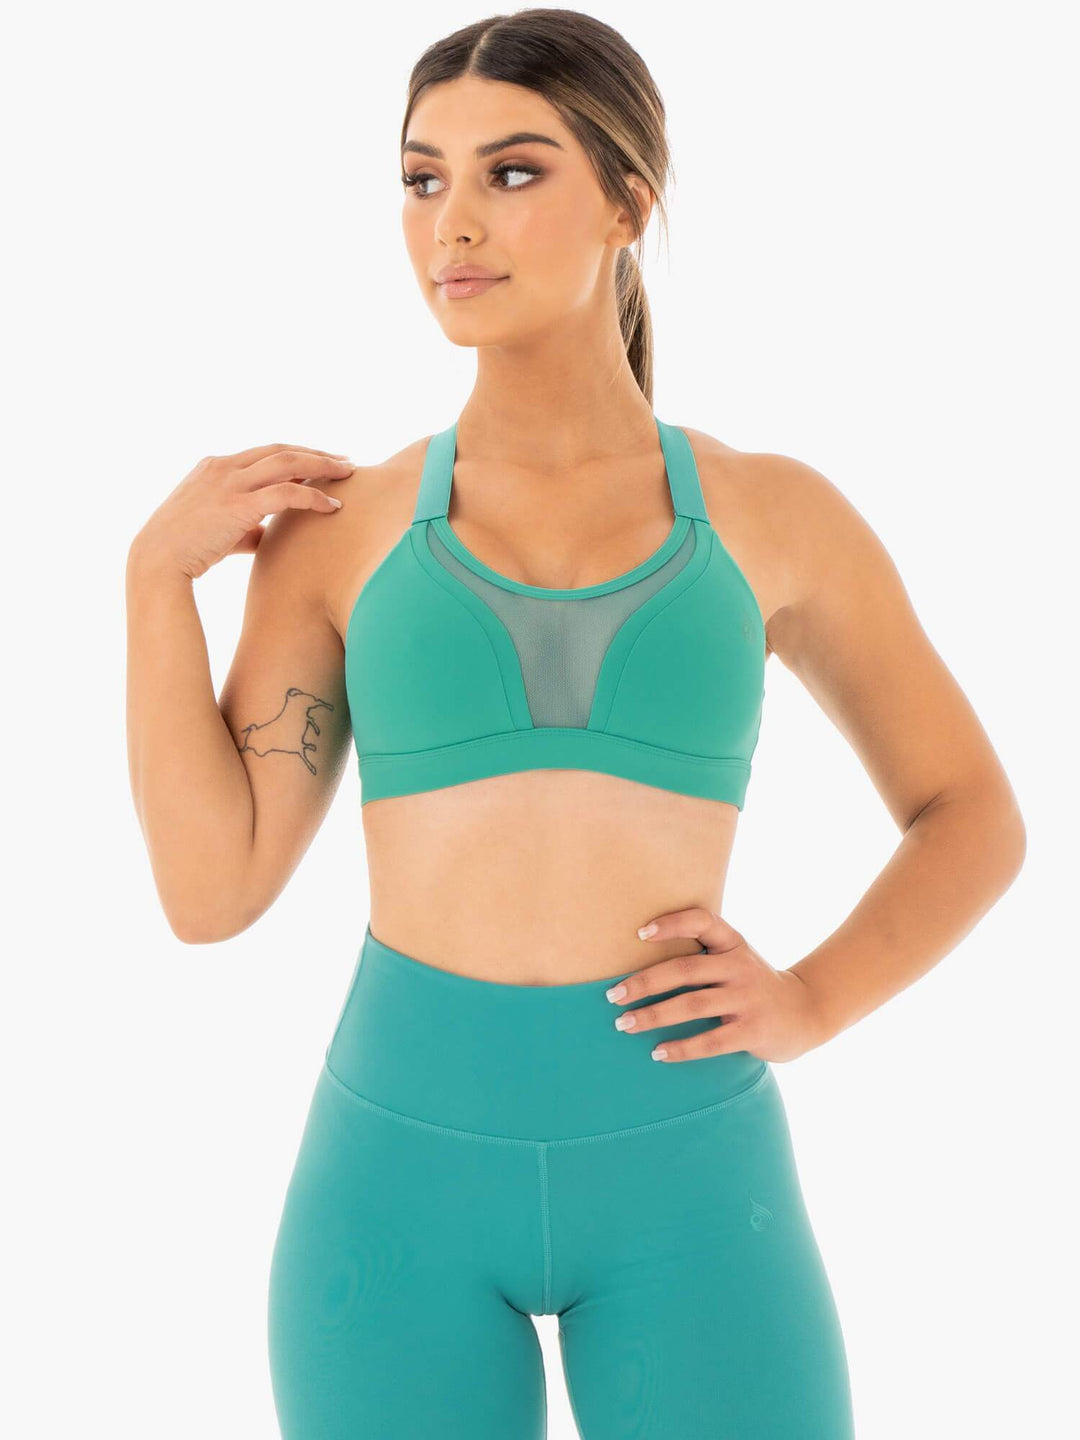 Collide Mesh Contour Sports Bra - Turquoise Clothing Ryderwear 